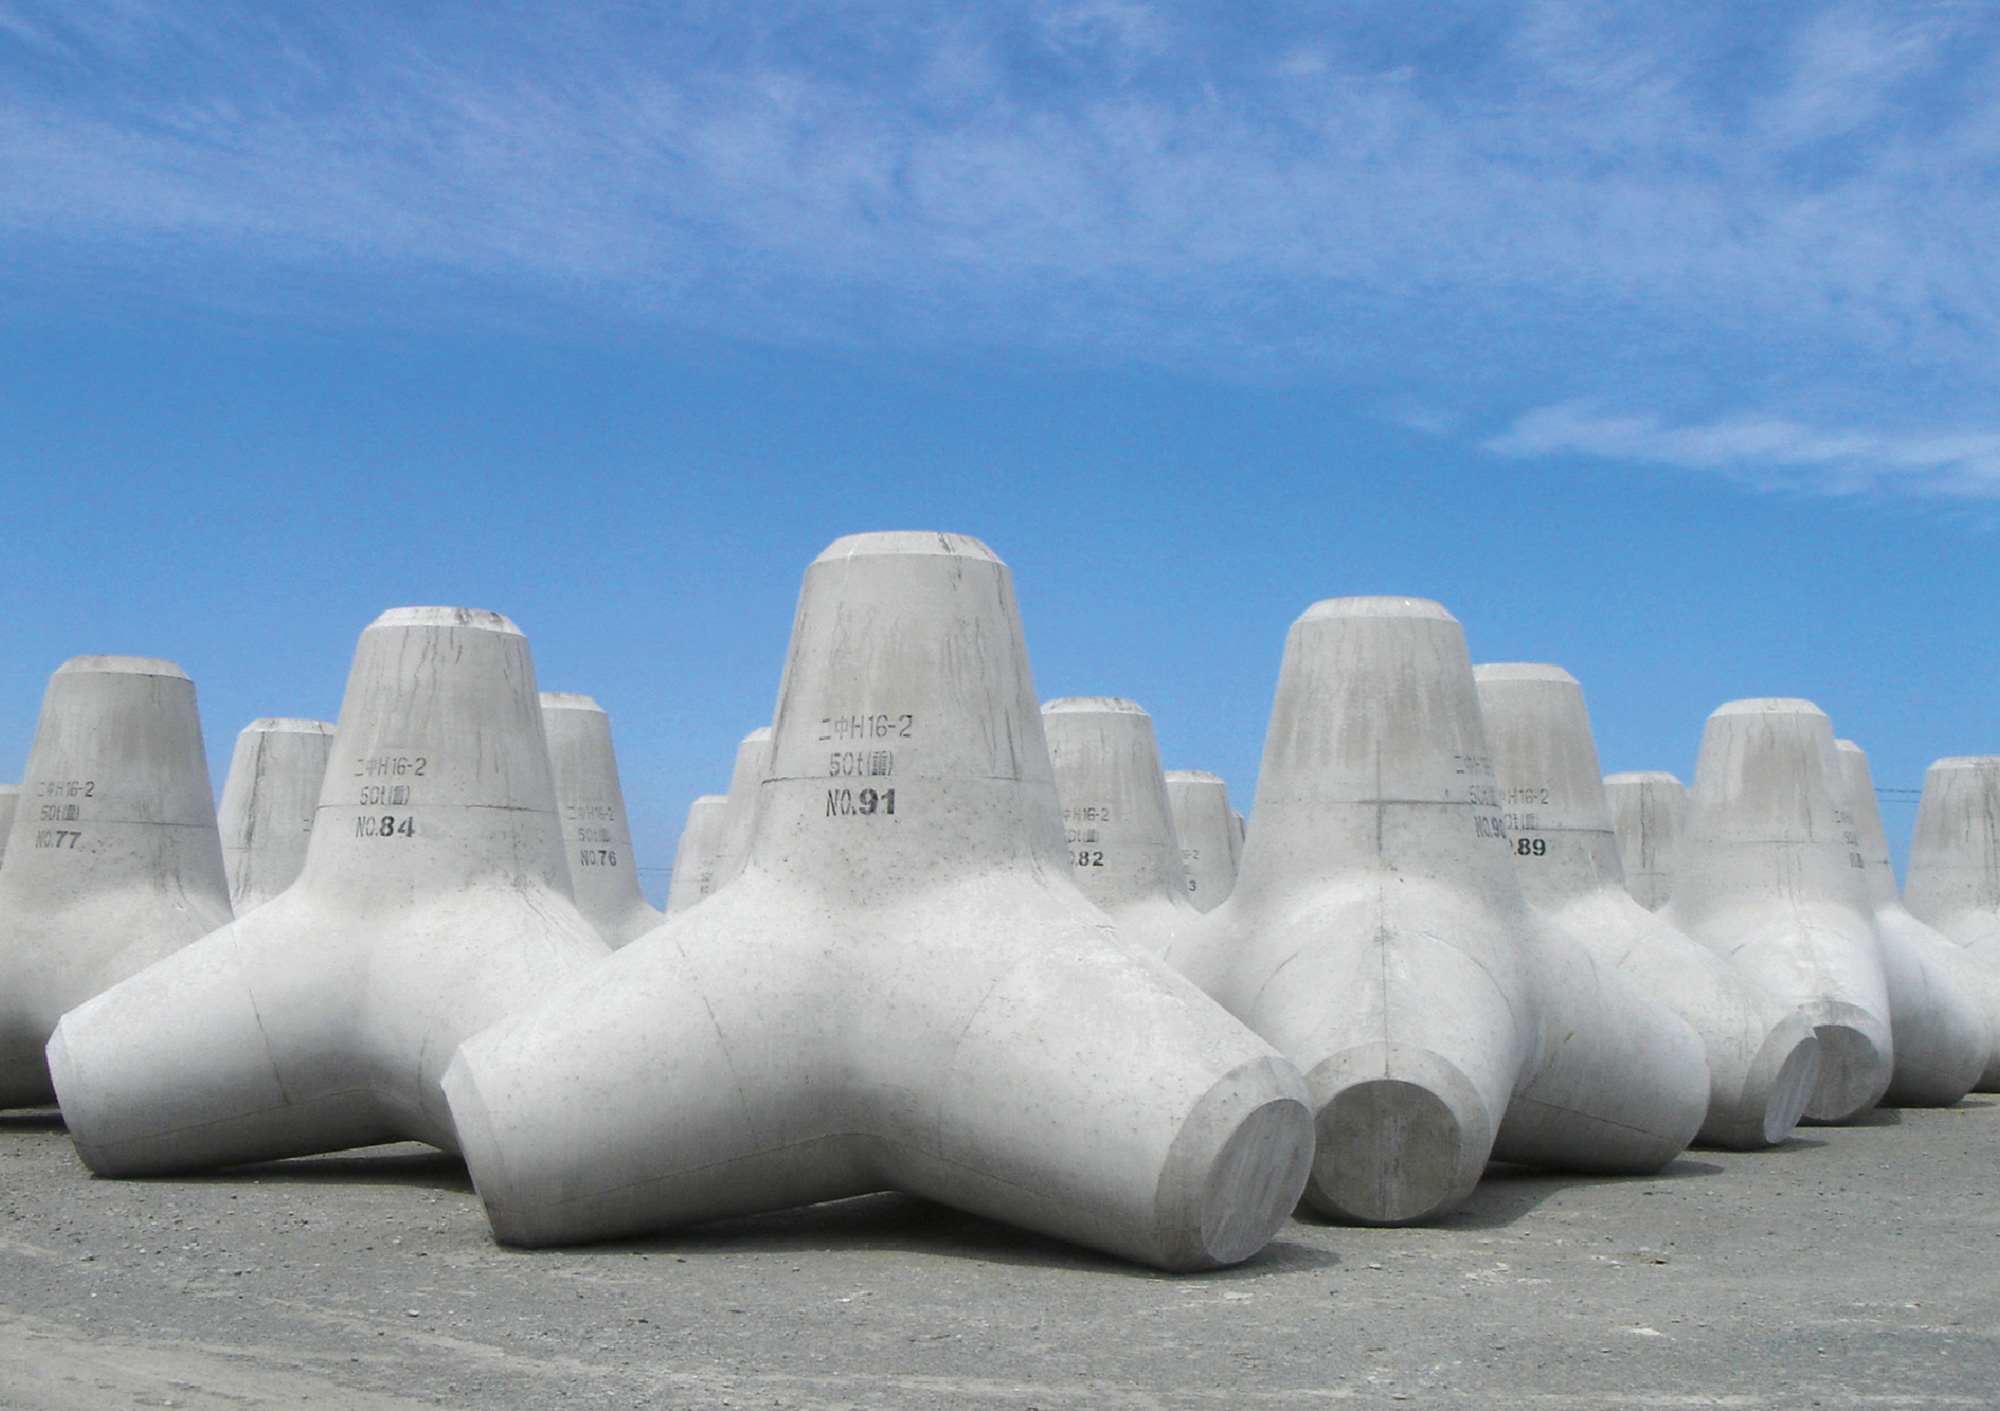 A photograph of newly manufactured tetrapods on land before being put to use.